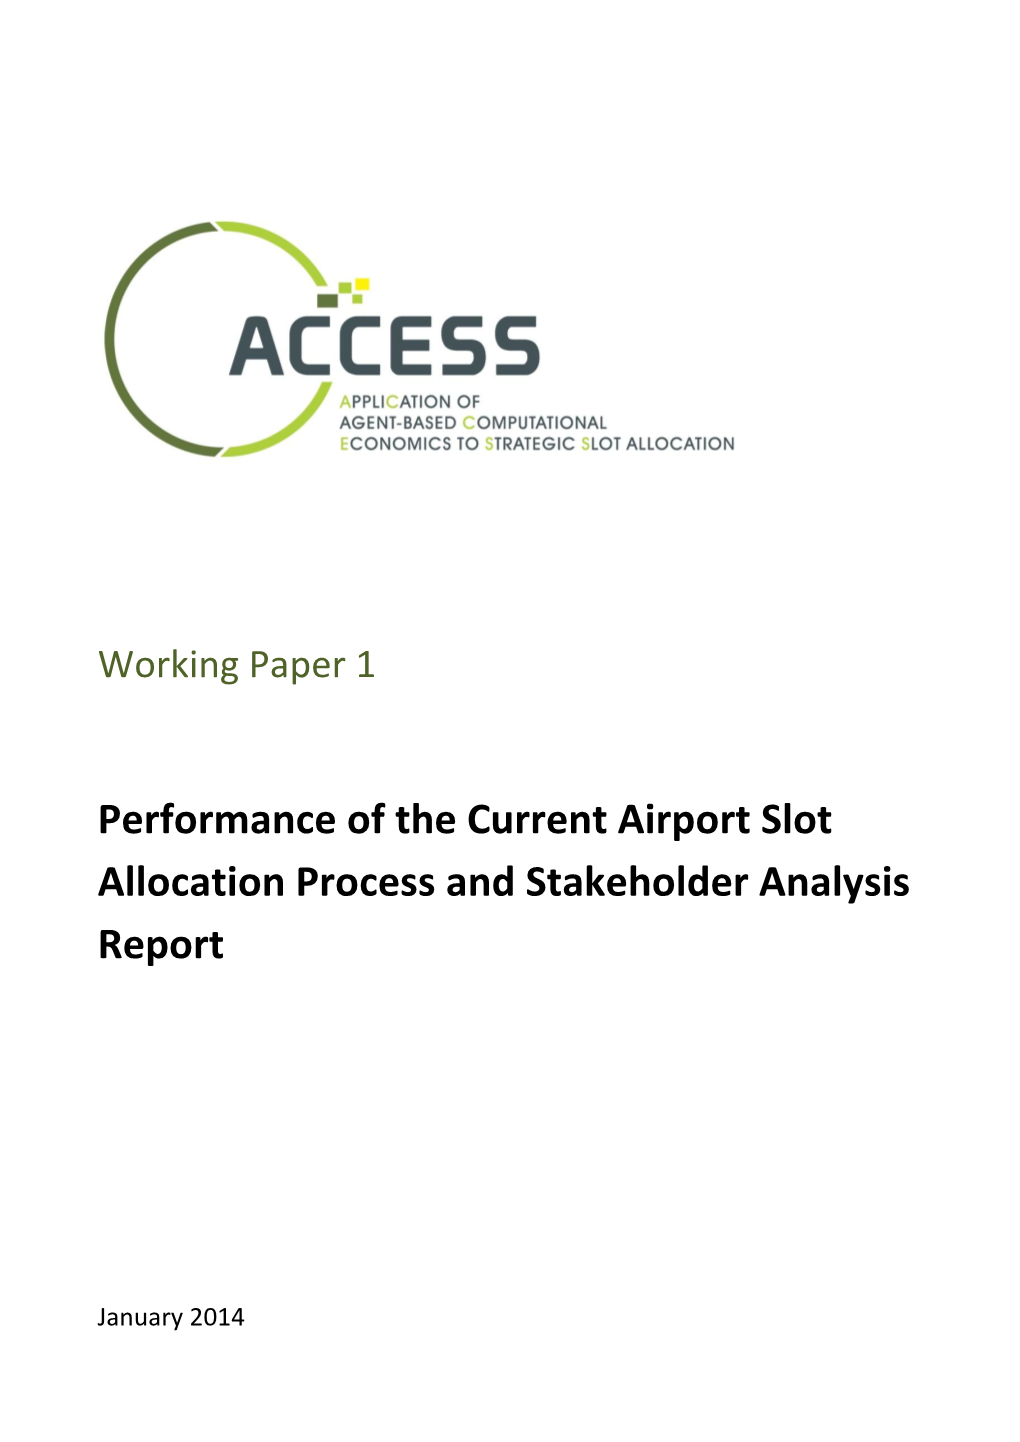 Performance of the Current Airport Slot Allocation Process and Stakeholder Analysis Report